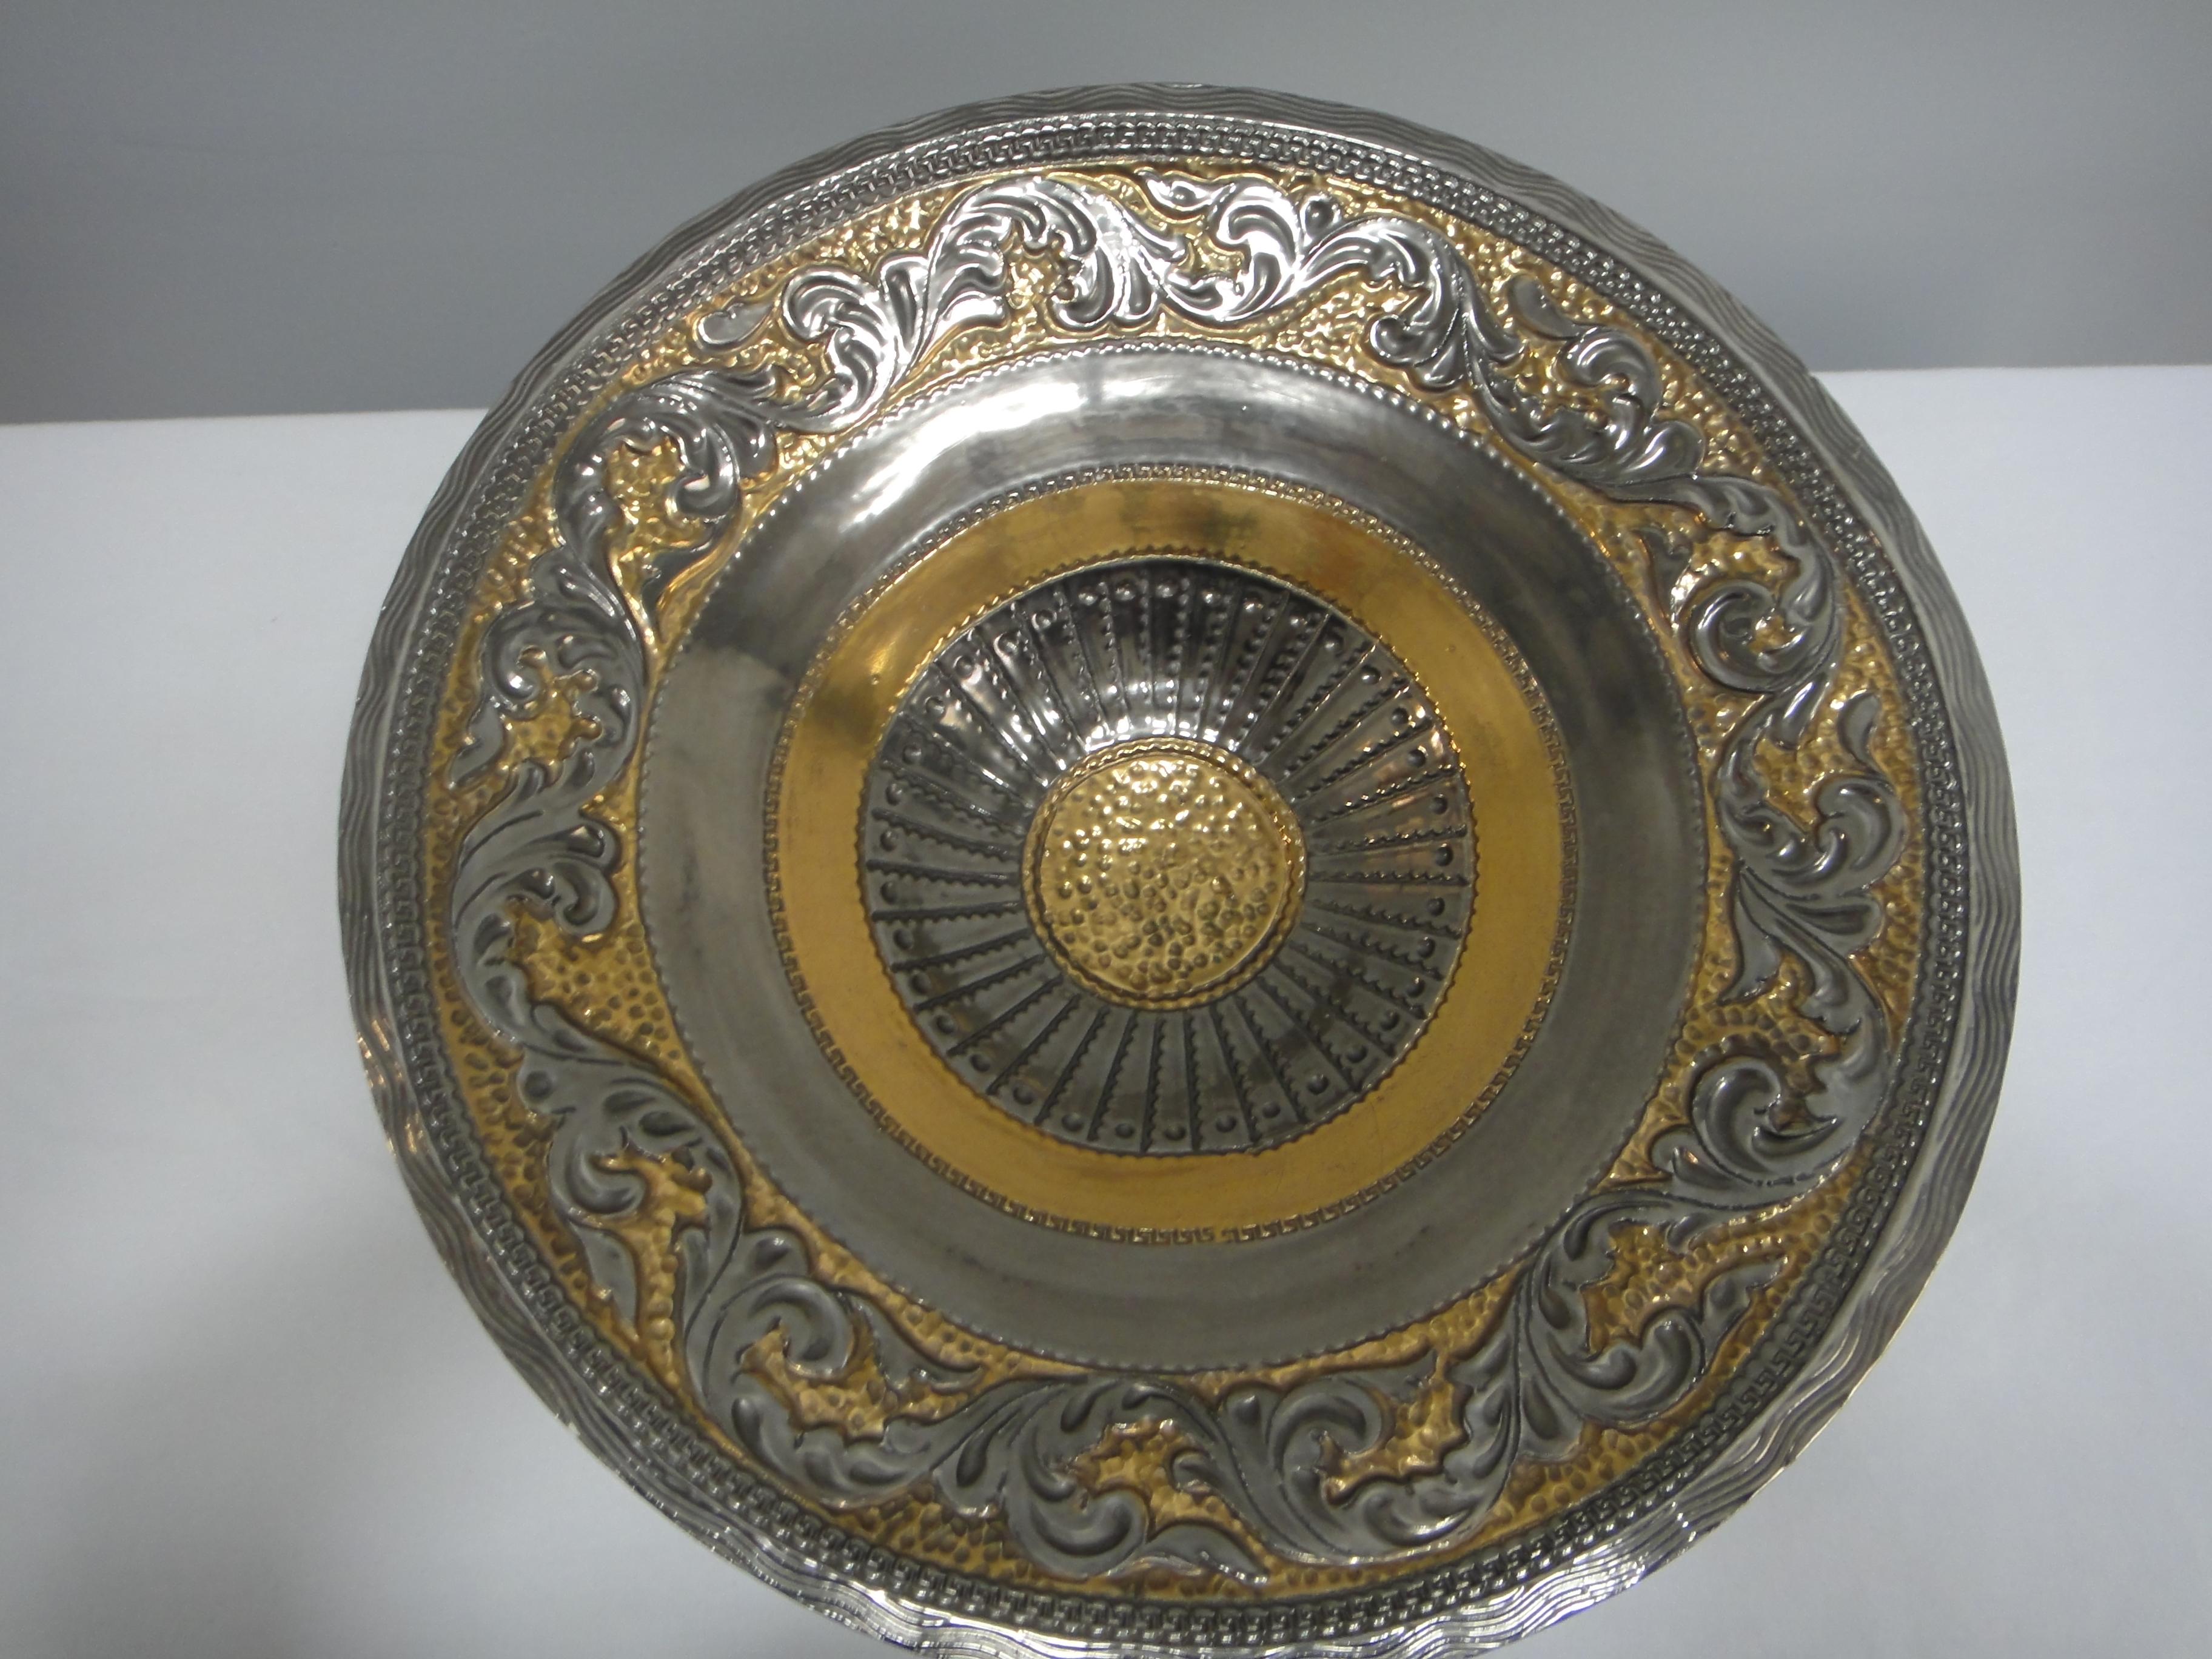 Offered for sale is a striking glazed ceramic centerpiece bowl created in the neoclassical style by Marioni of Italy. The bowl is created to appear as though it is metal.